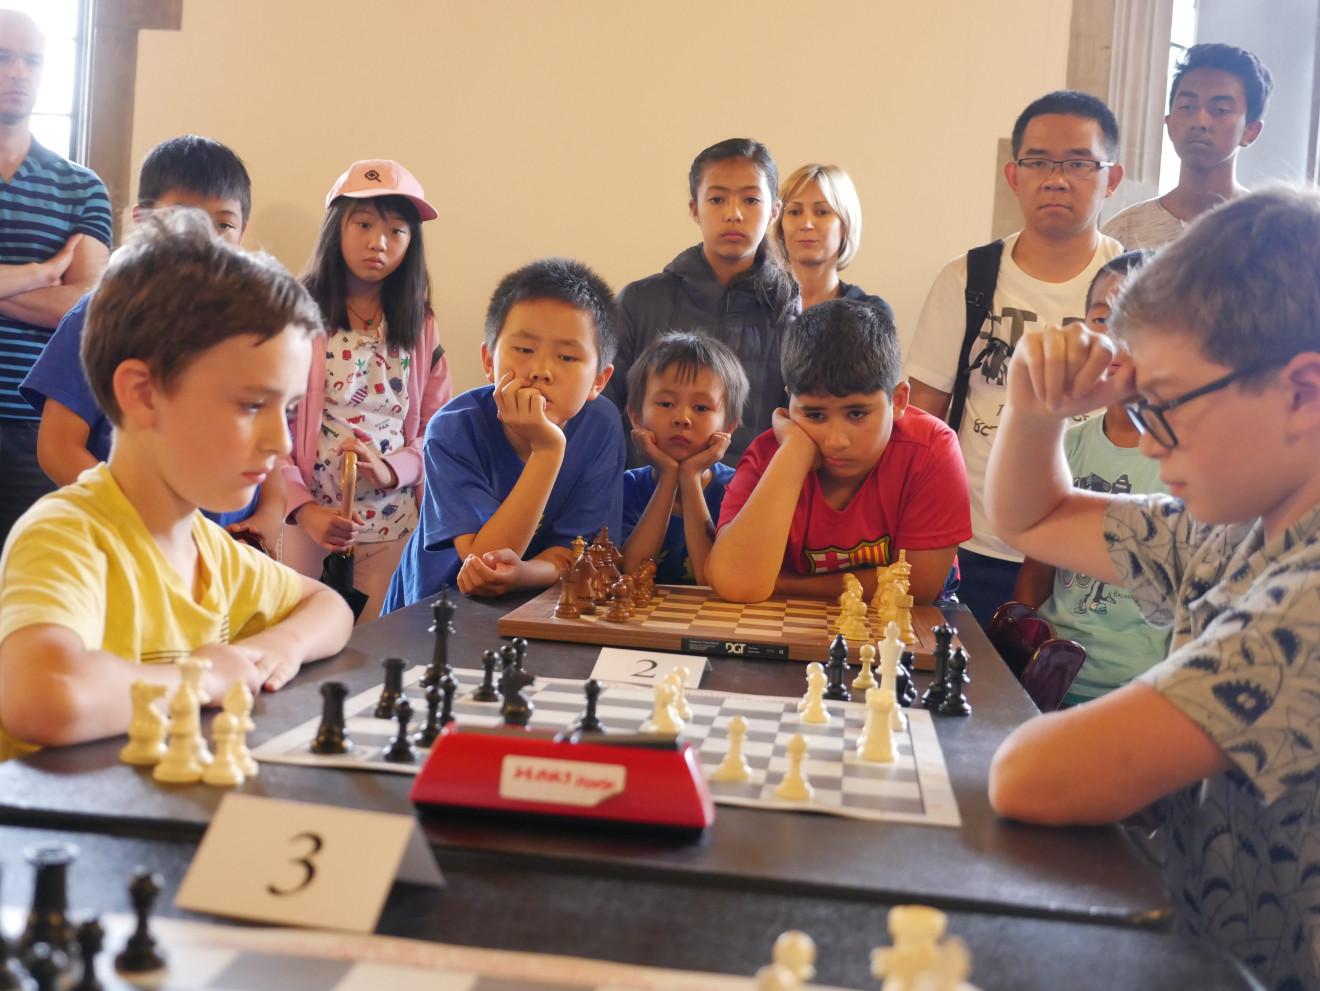 Image of children playing chess in a tournament setting.